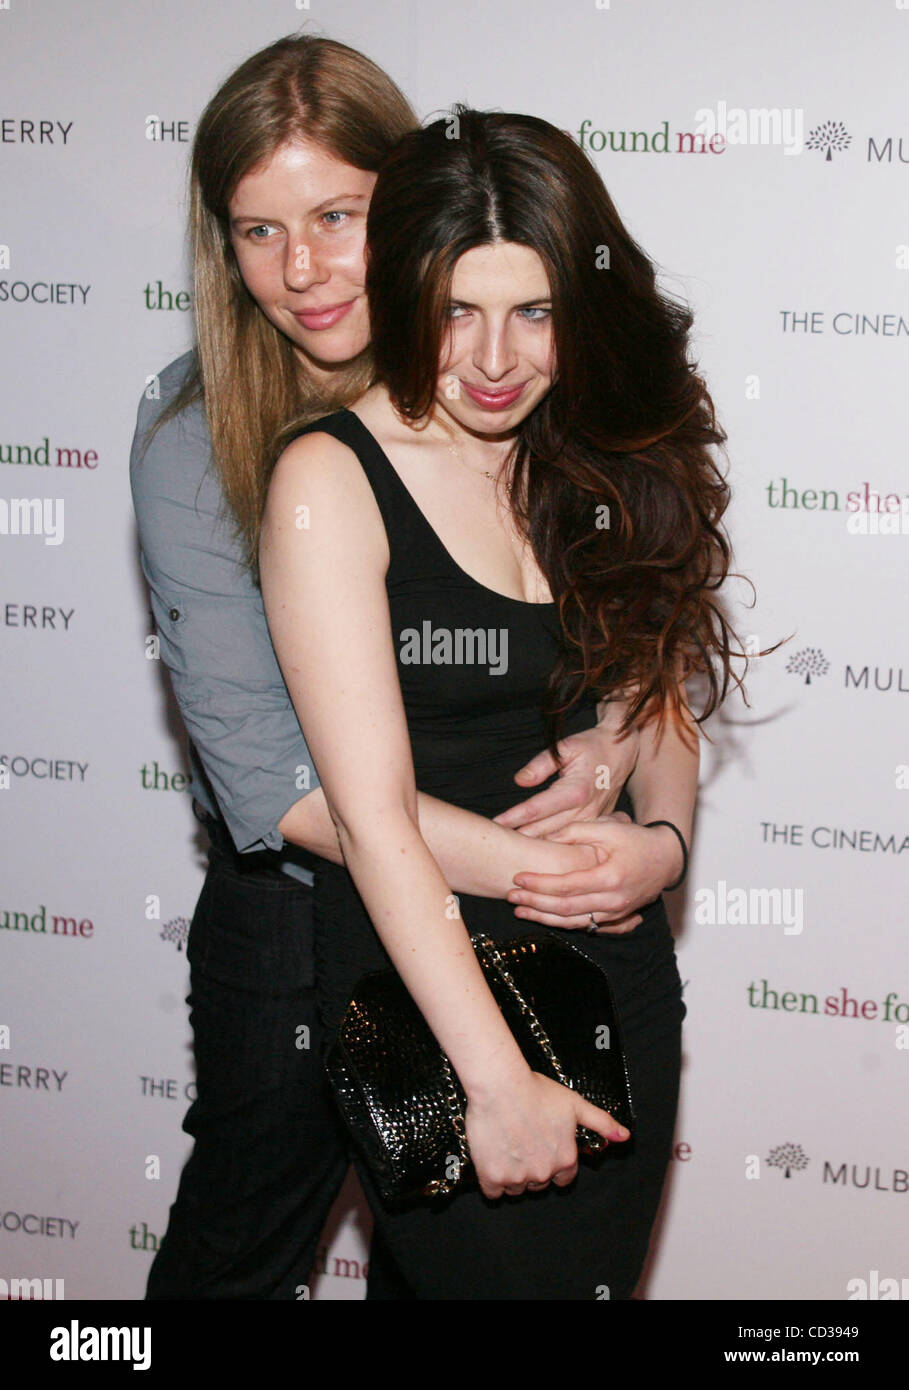 Apr 21, 2008 - New York, NY, USA -Actress HEATHER MATARAZZO (R) and her girlfriend at the arrivals for the Cinema Society and Mulberry hosted screening of 'Then She Found Me' held at AMC Lincoln Square. (Credit Image: © Nancy Kaszerman/ZUMA Press) Stock Photo